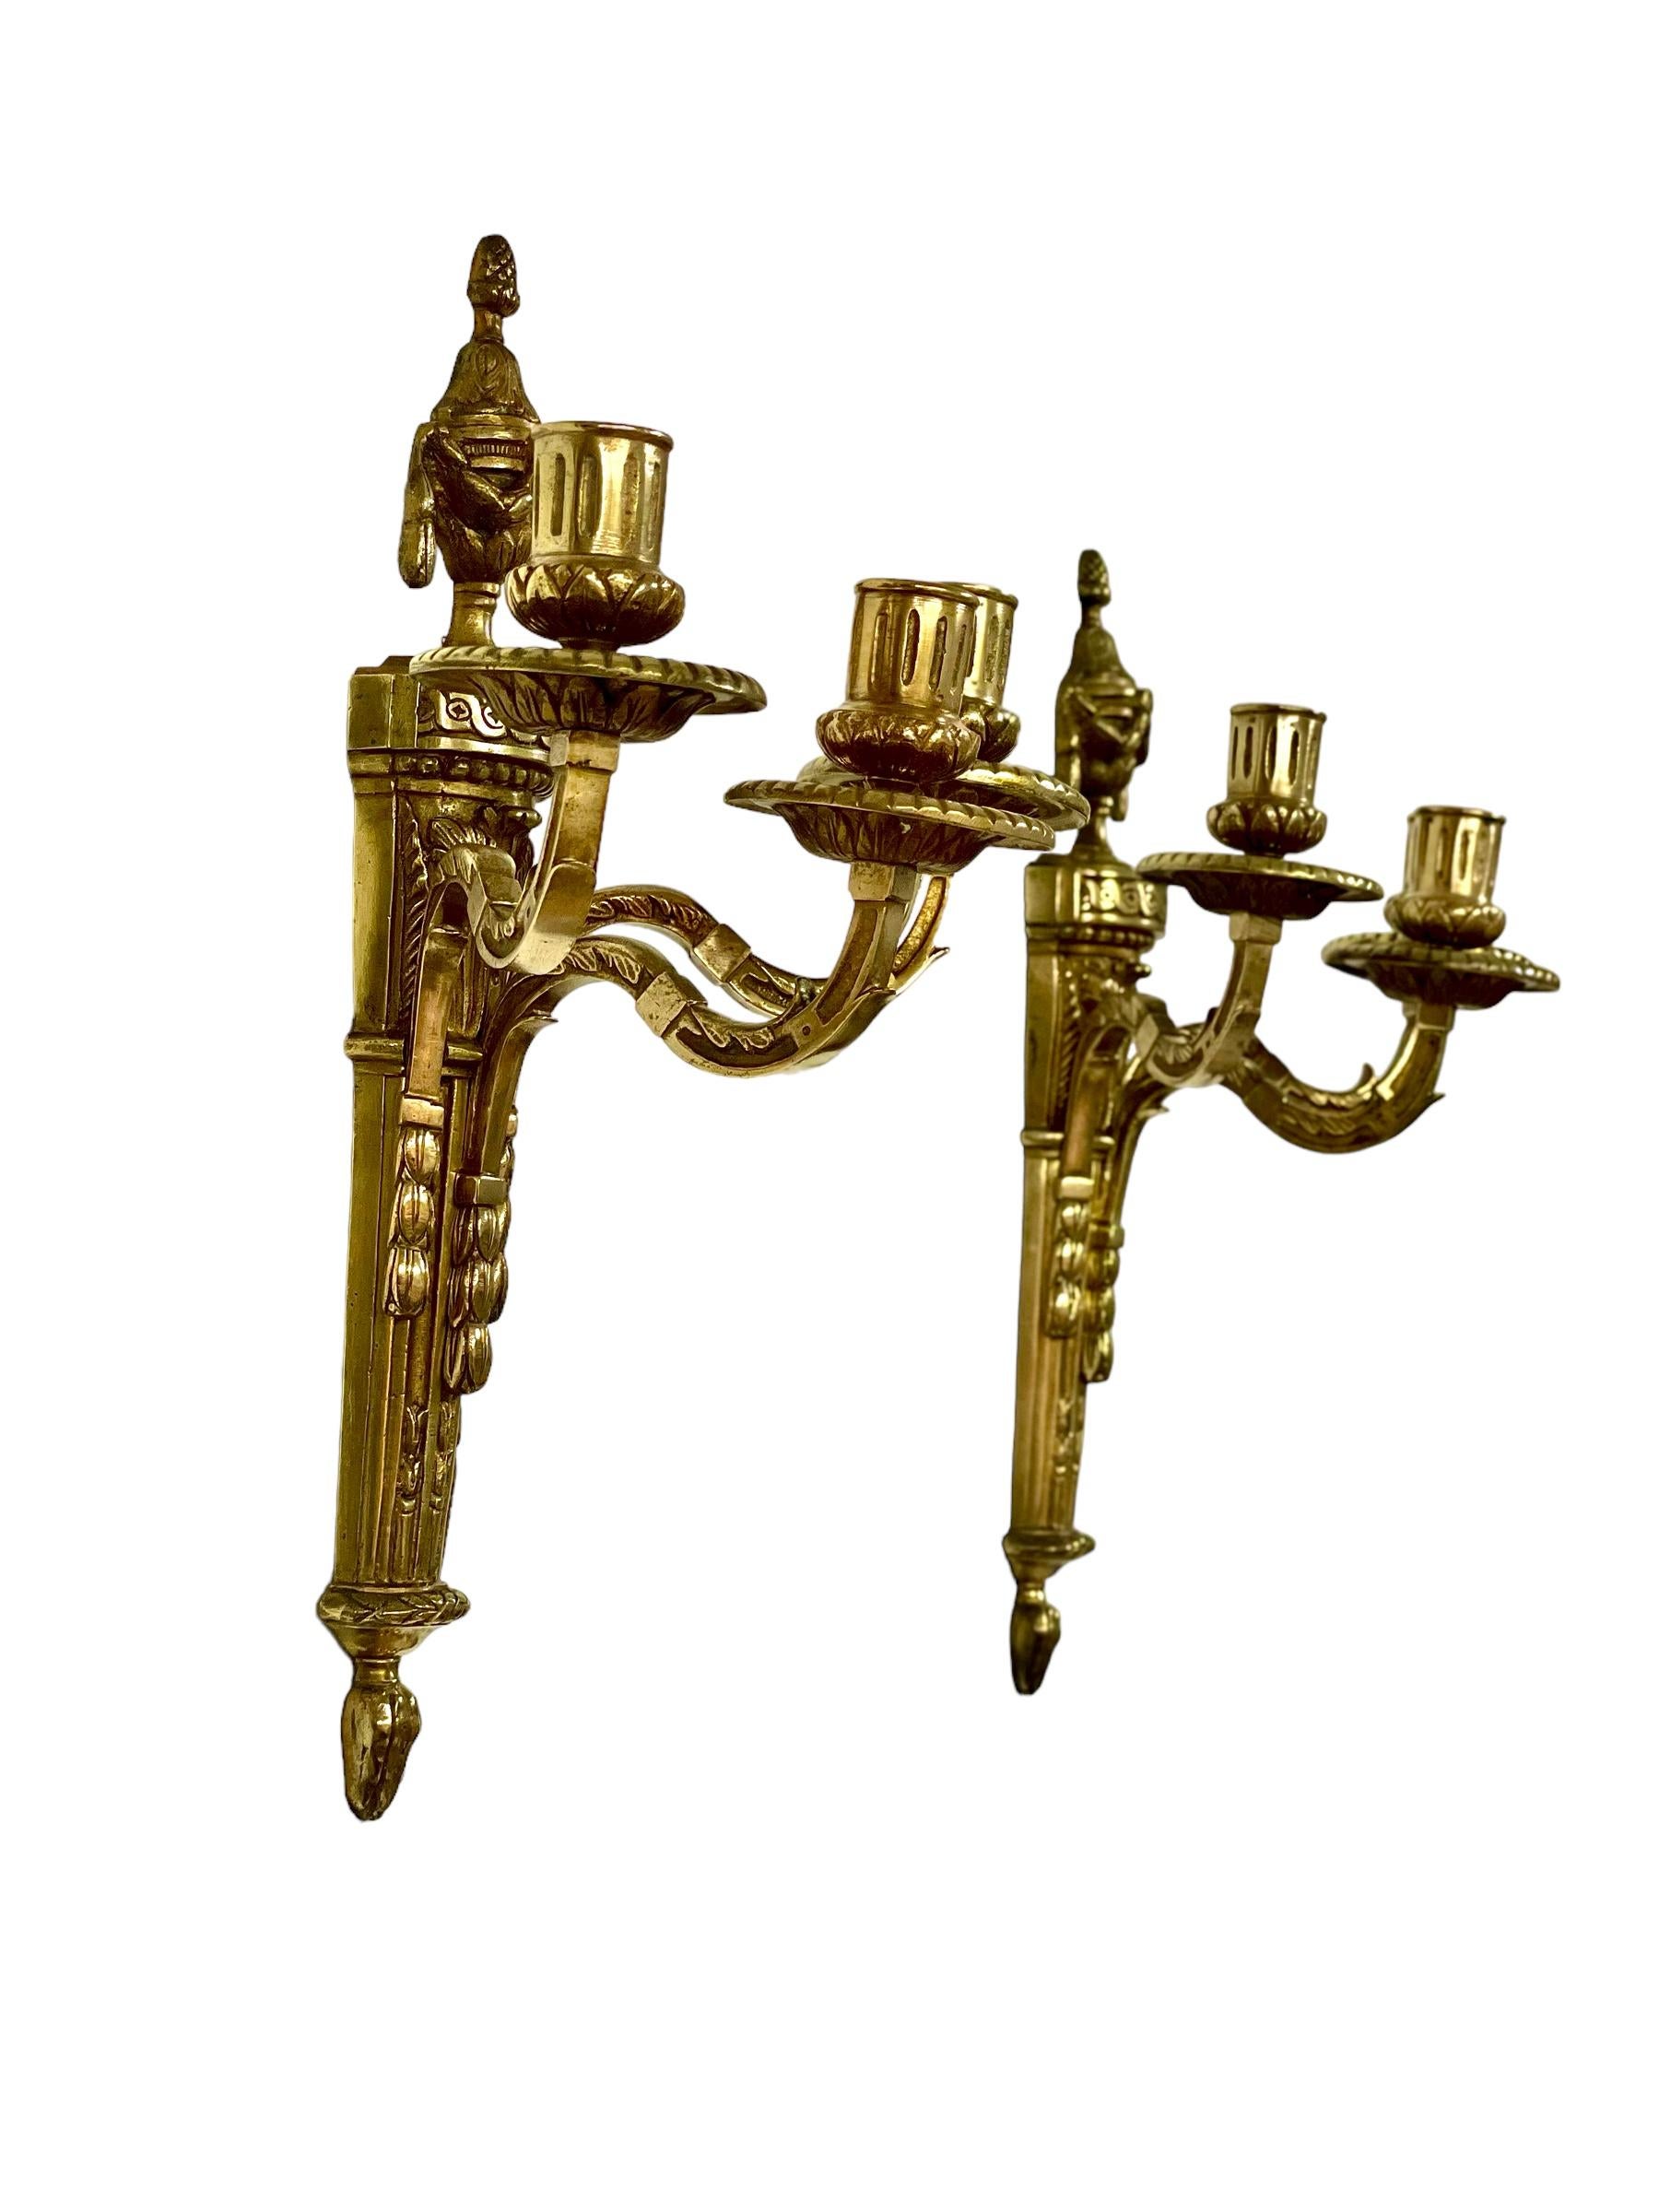 A pair of 19th century, Louis XVI style wall sconces, in chiselled and gilded bronze, in a very striking neoclassical design. The reeded backplate is in torch form, with a swagged urn above, topped with an acorn finial. The two arms have foliate